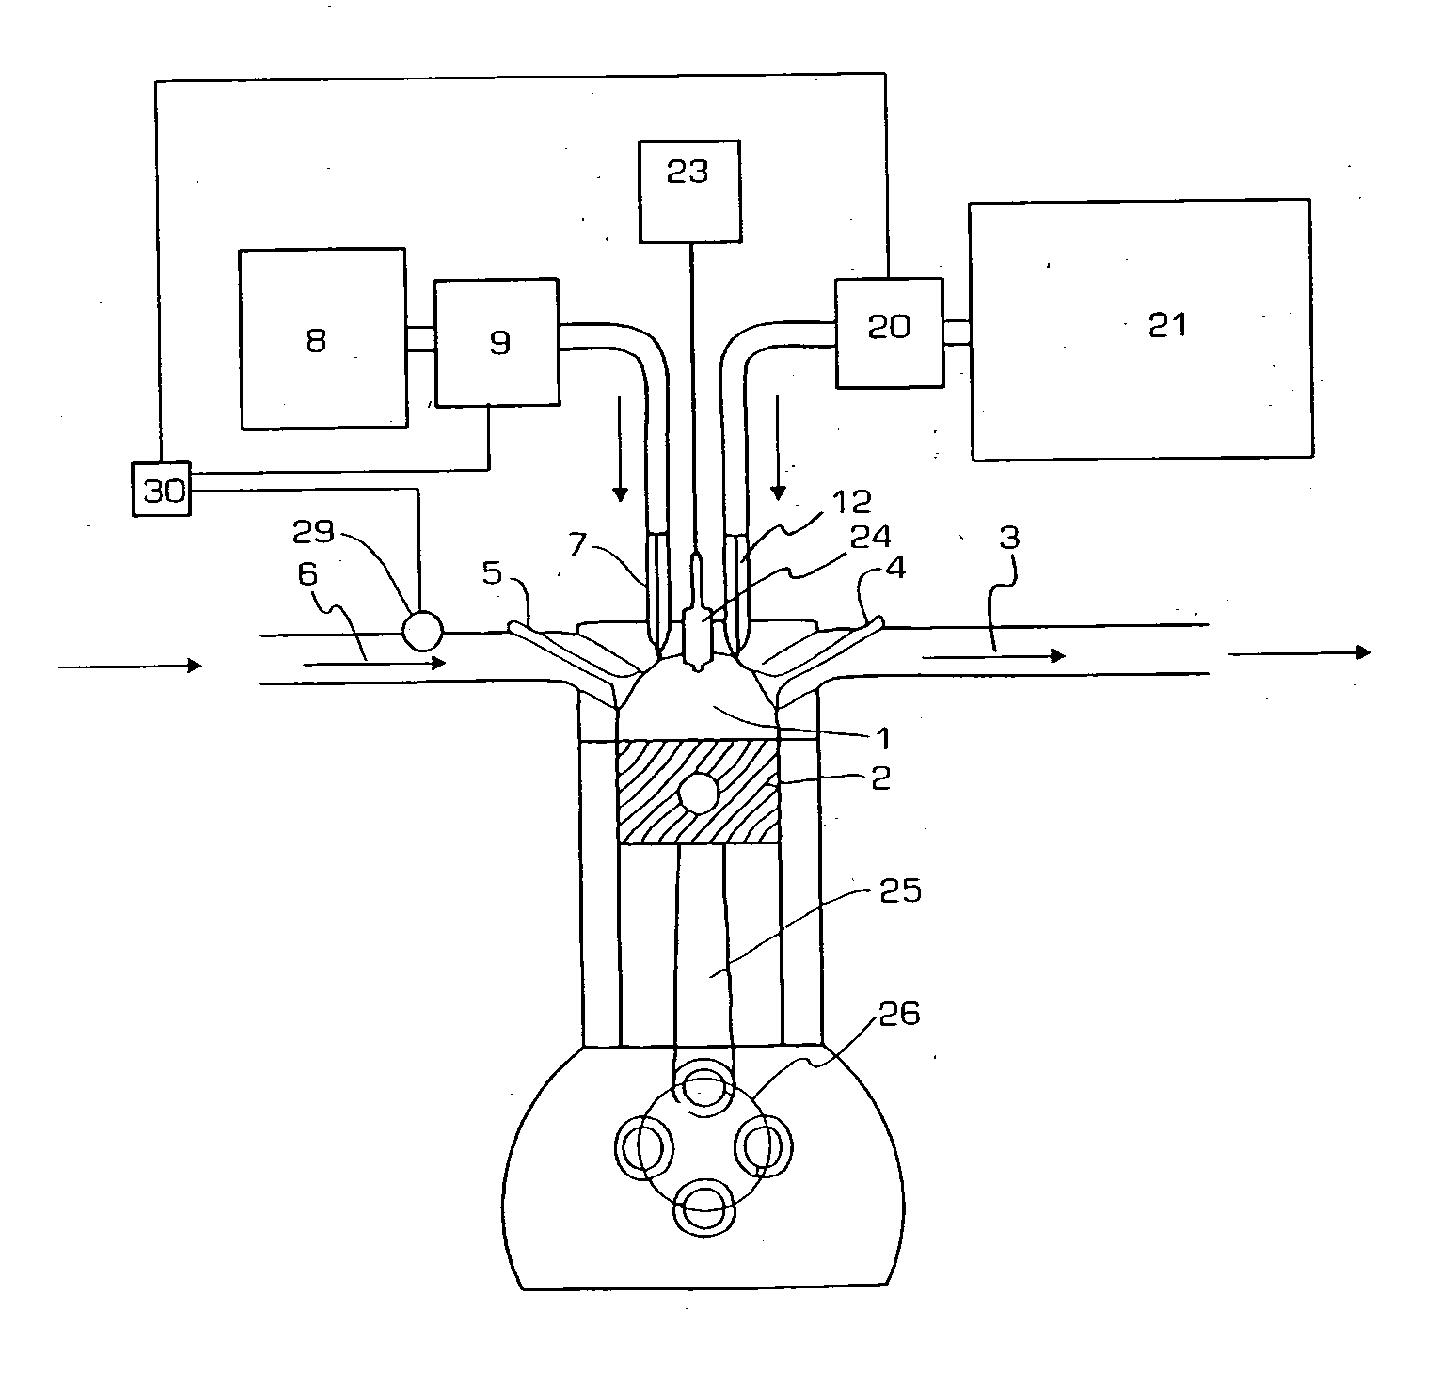 Internally cooled exhaust gas recirculation system for internal combustion engine and method thereof